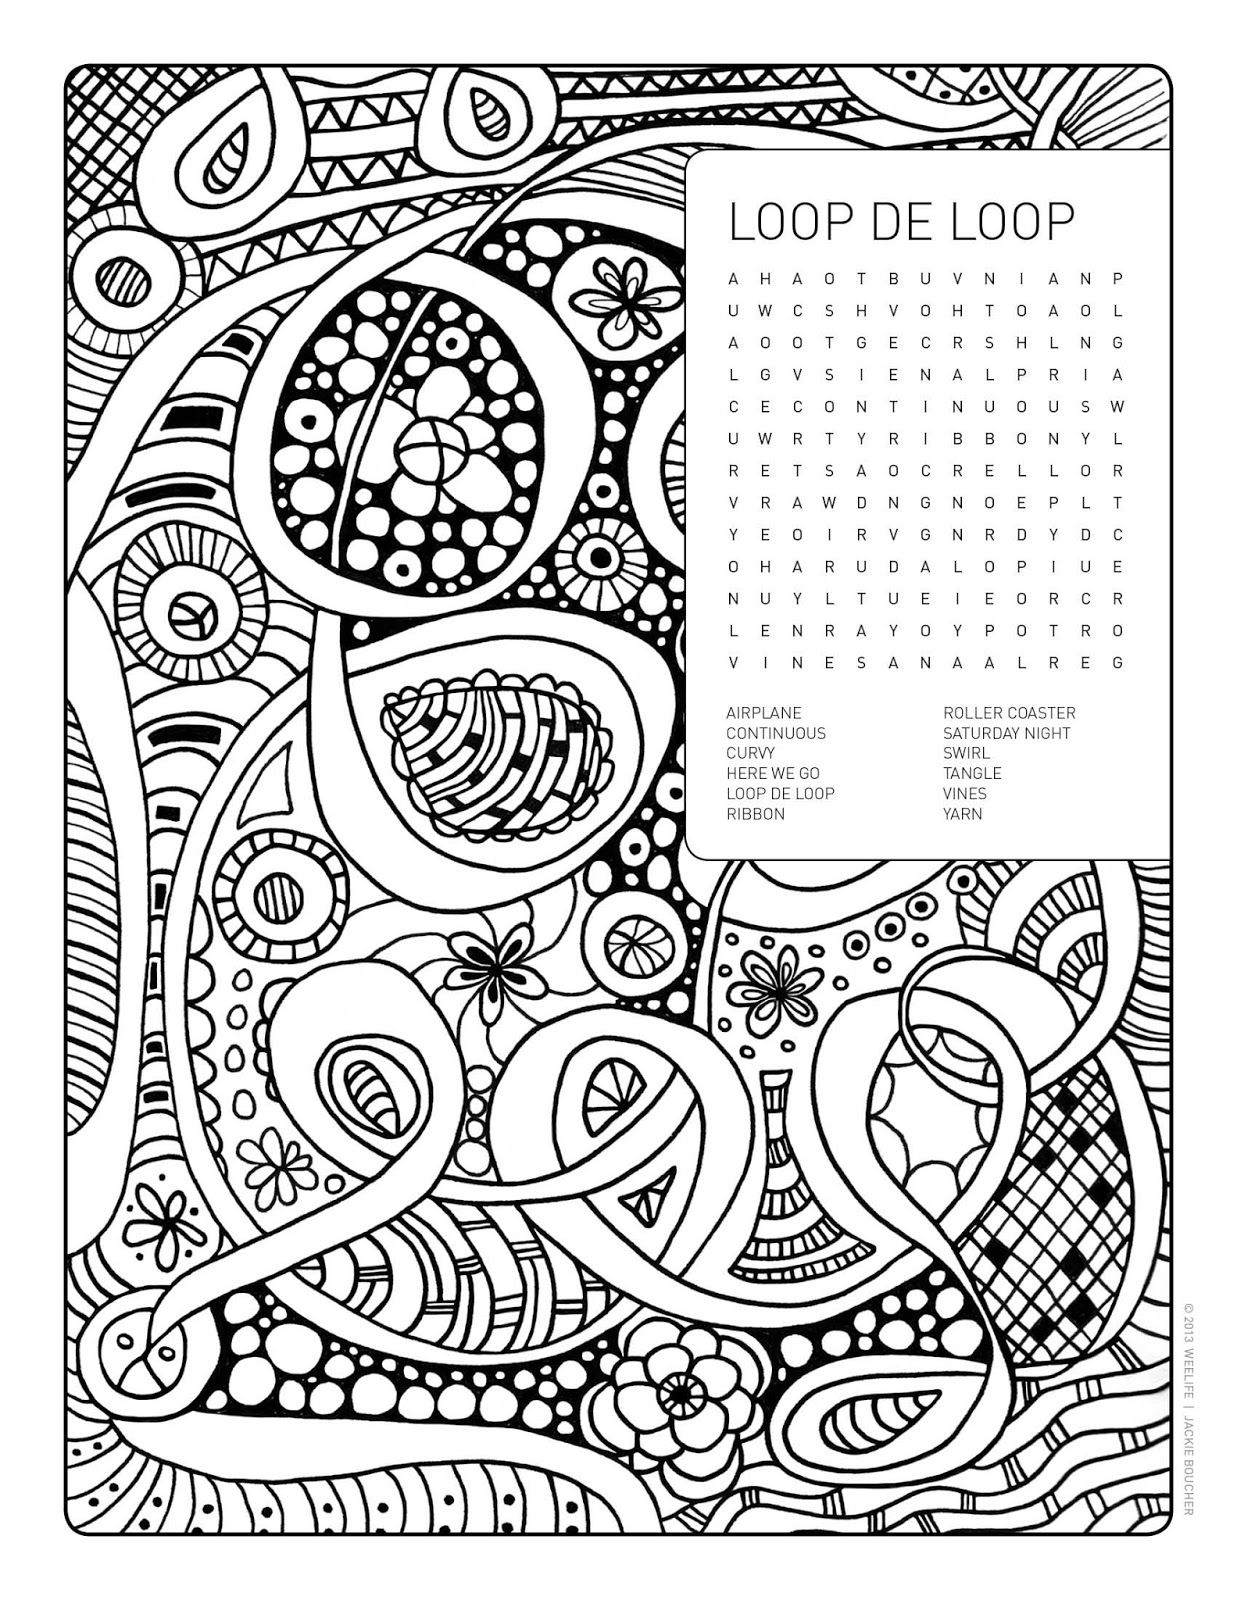 Word searchcoloring page free printable word searches coloring pages printable christmas coloring pages